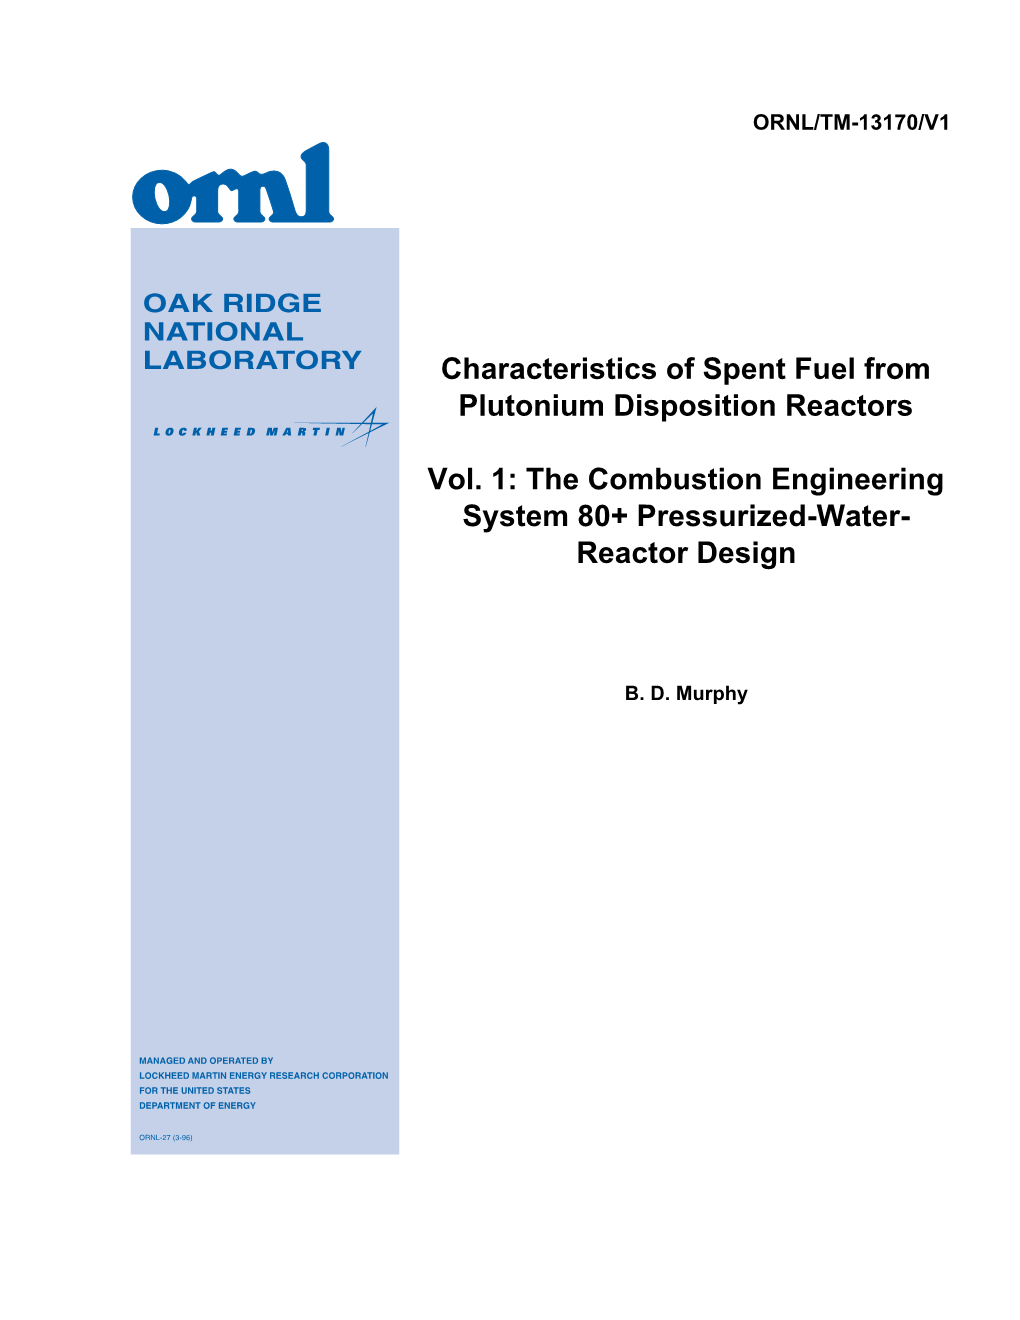 Characteristics of Spent Fuel from Plutonium Disposition Reactors Vol. 1: the Combustion Engineering System 80+ Pressurized-Water-Reactor Design